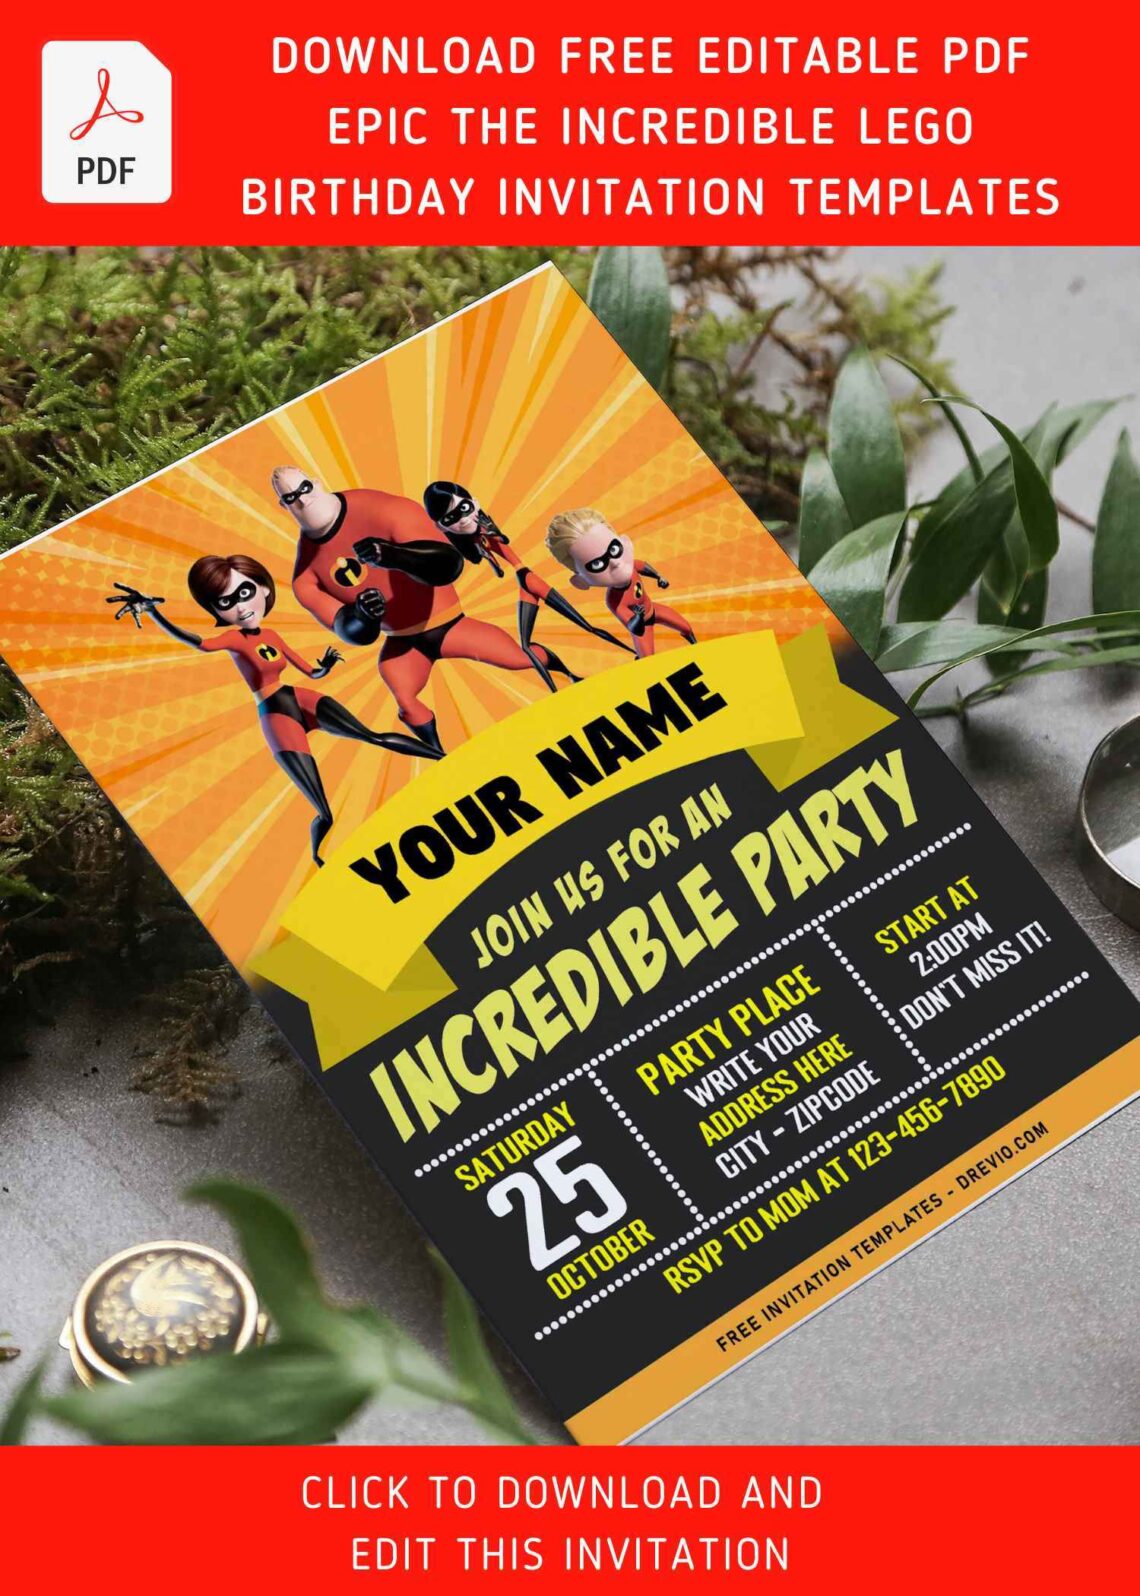 (Free Editable PDF) Epic The Incredible Birthday Invitation Templates For All Ages